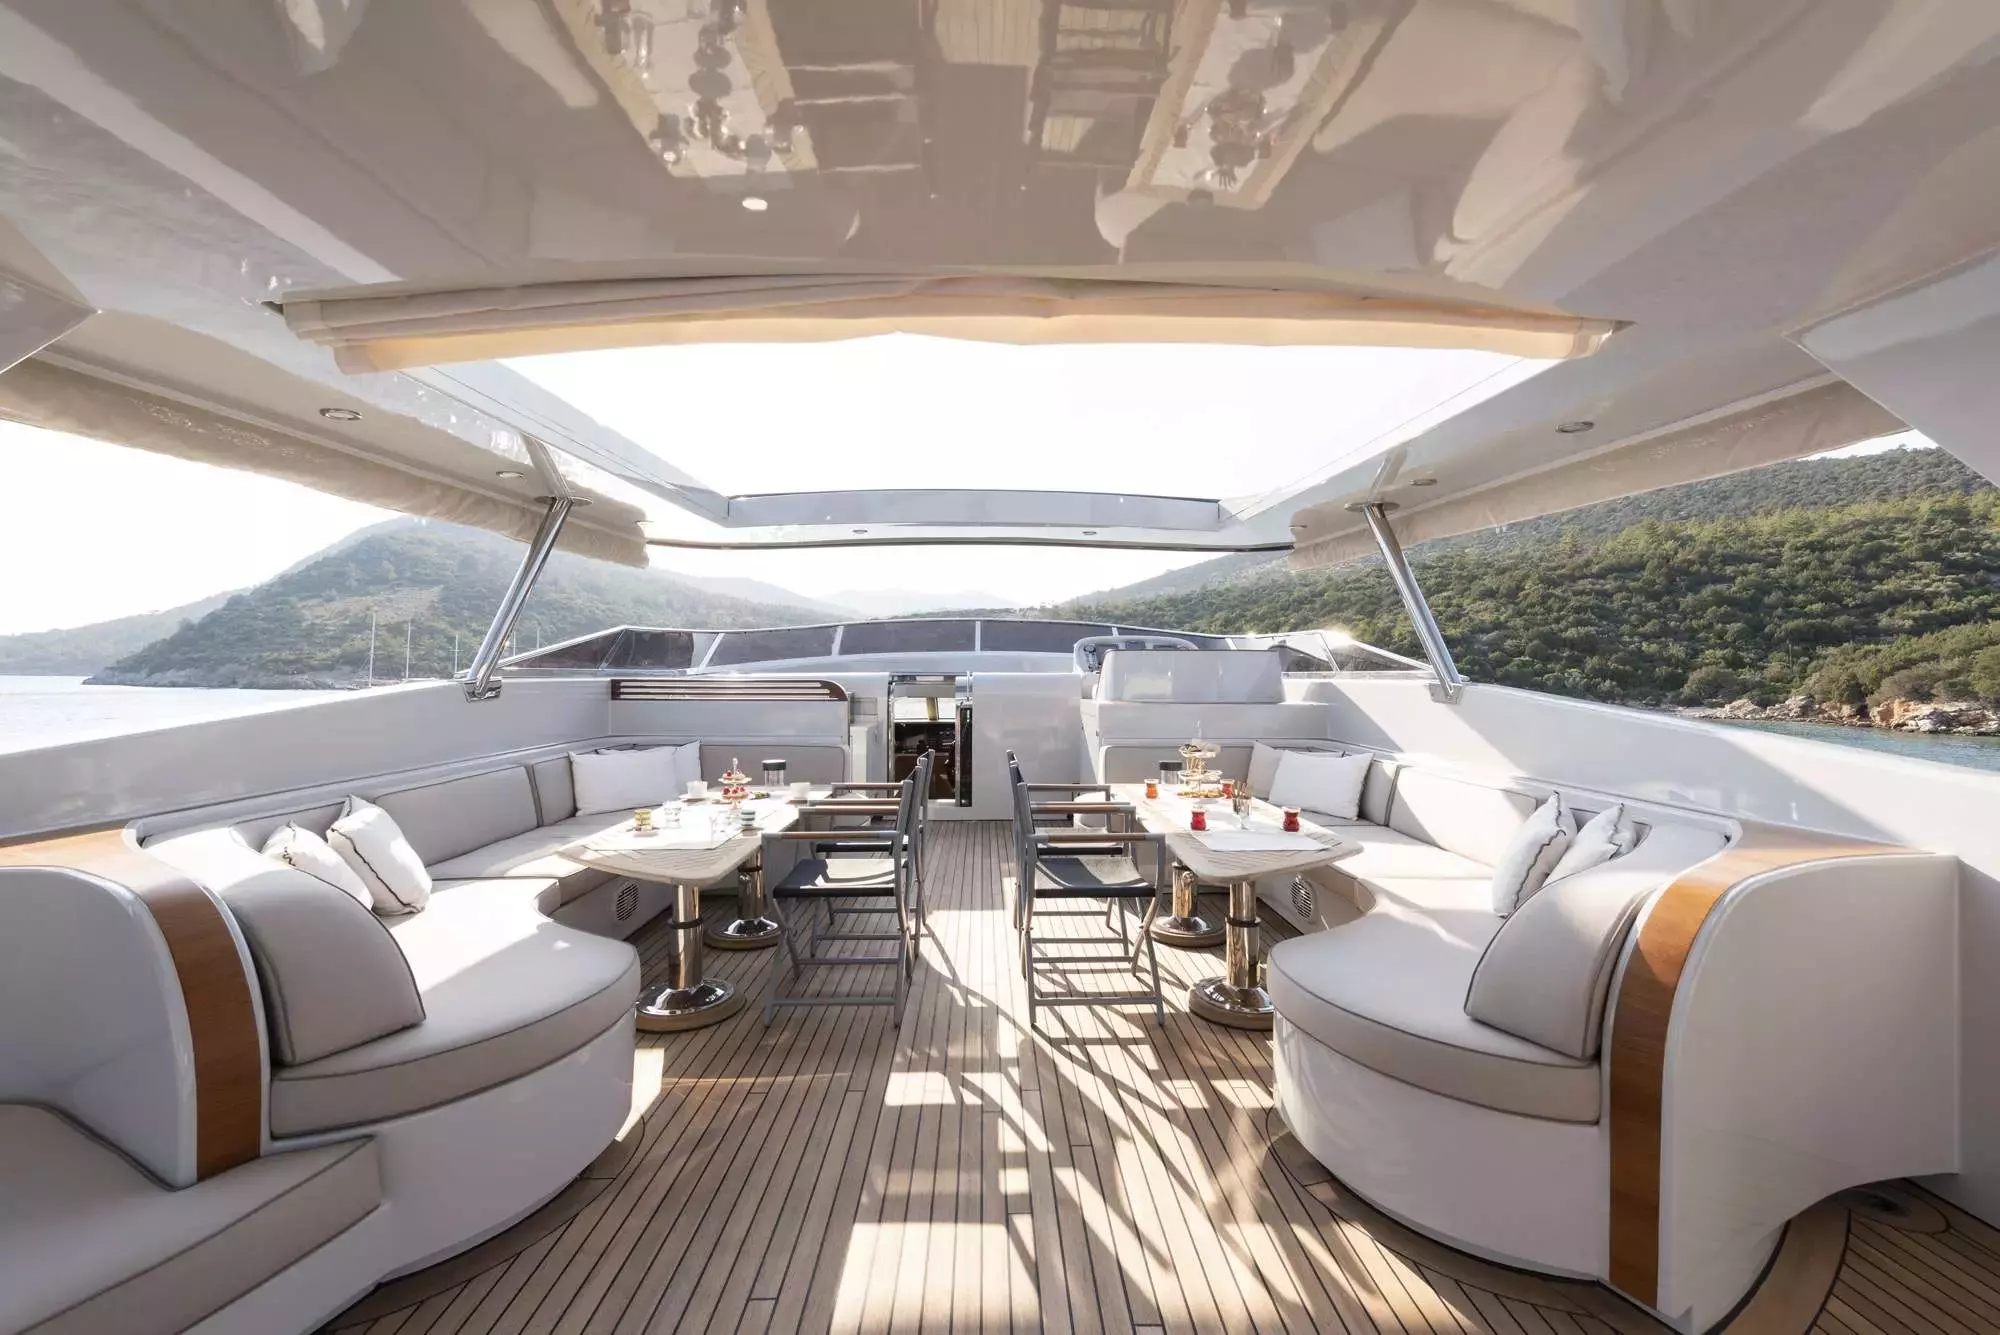 Go by Custom Made - Special Offer for a private Motor Yacht Charter in Antalya with a crew